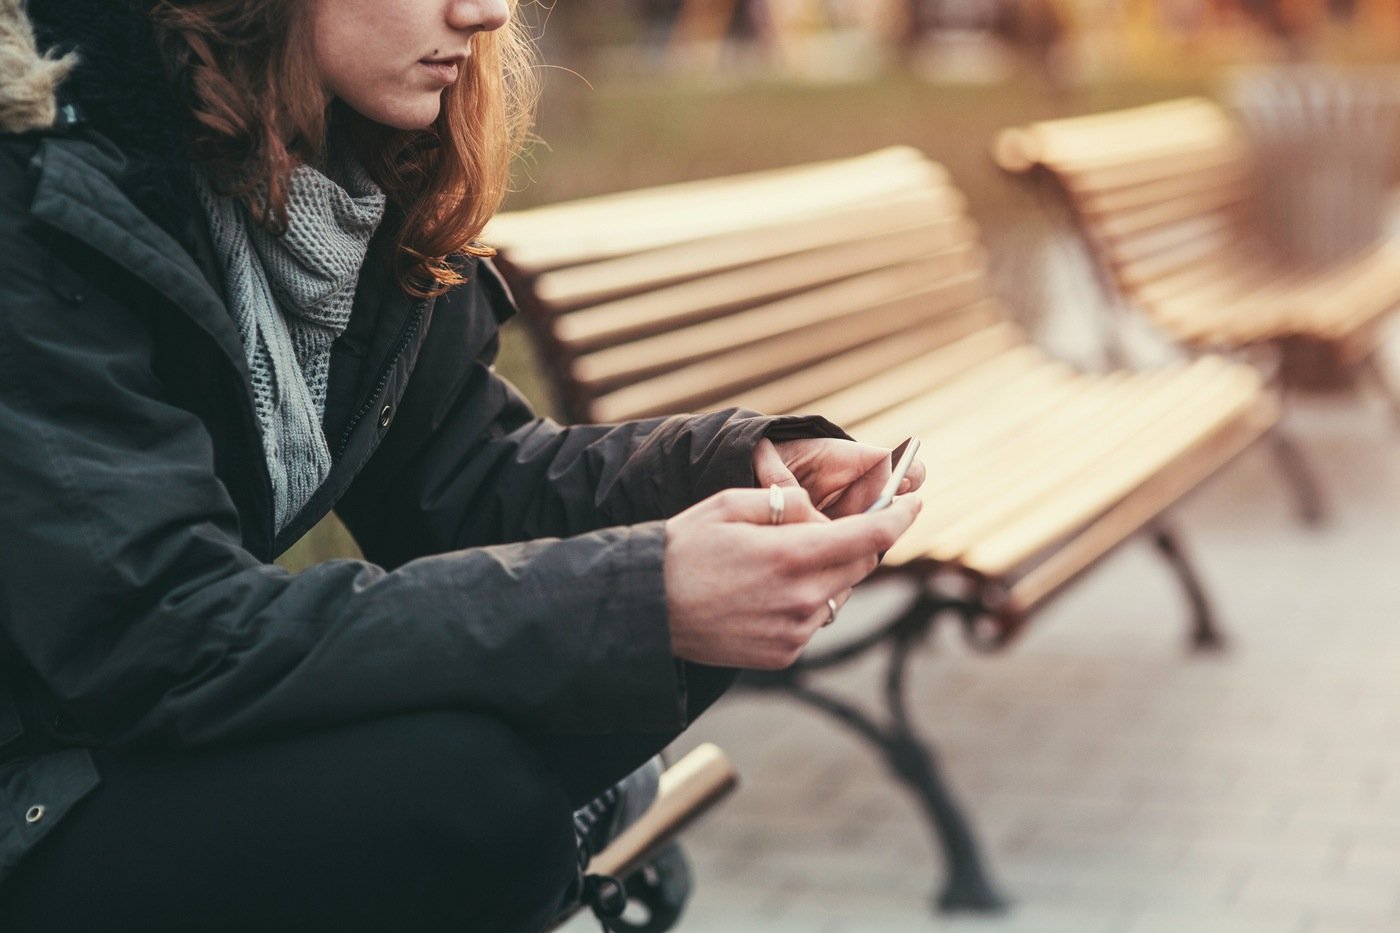 Girl Sitting on Bench Holding Cell Phone (Stock Image)